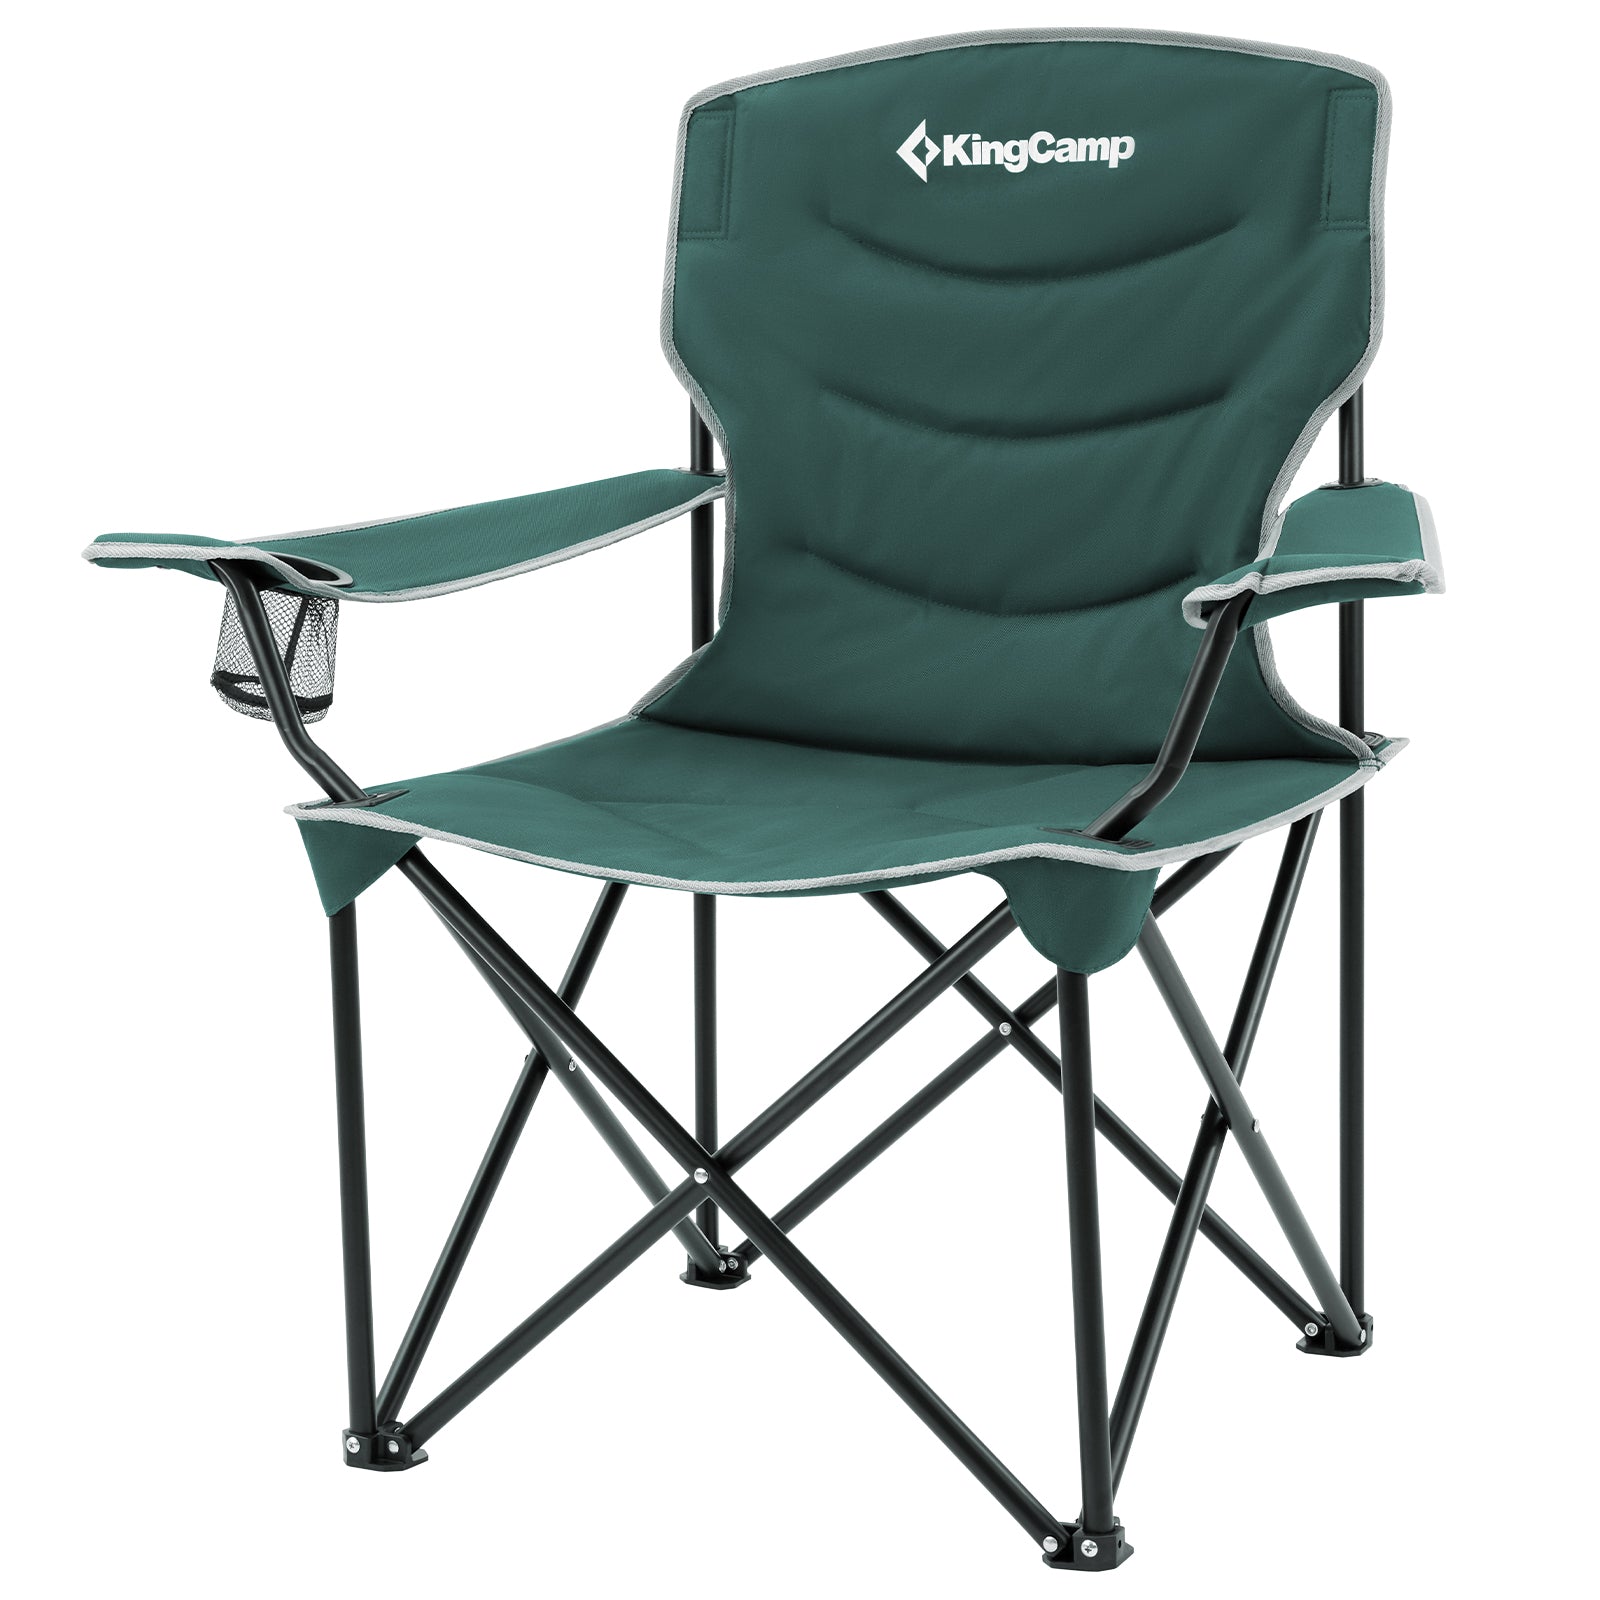 KingCamp Oversized Portable Lawn Chair